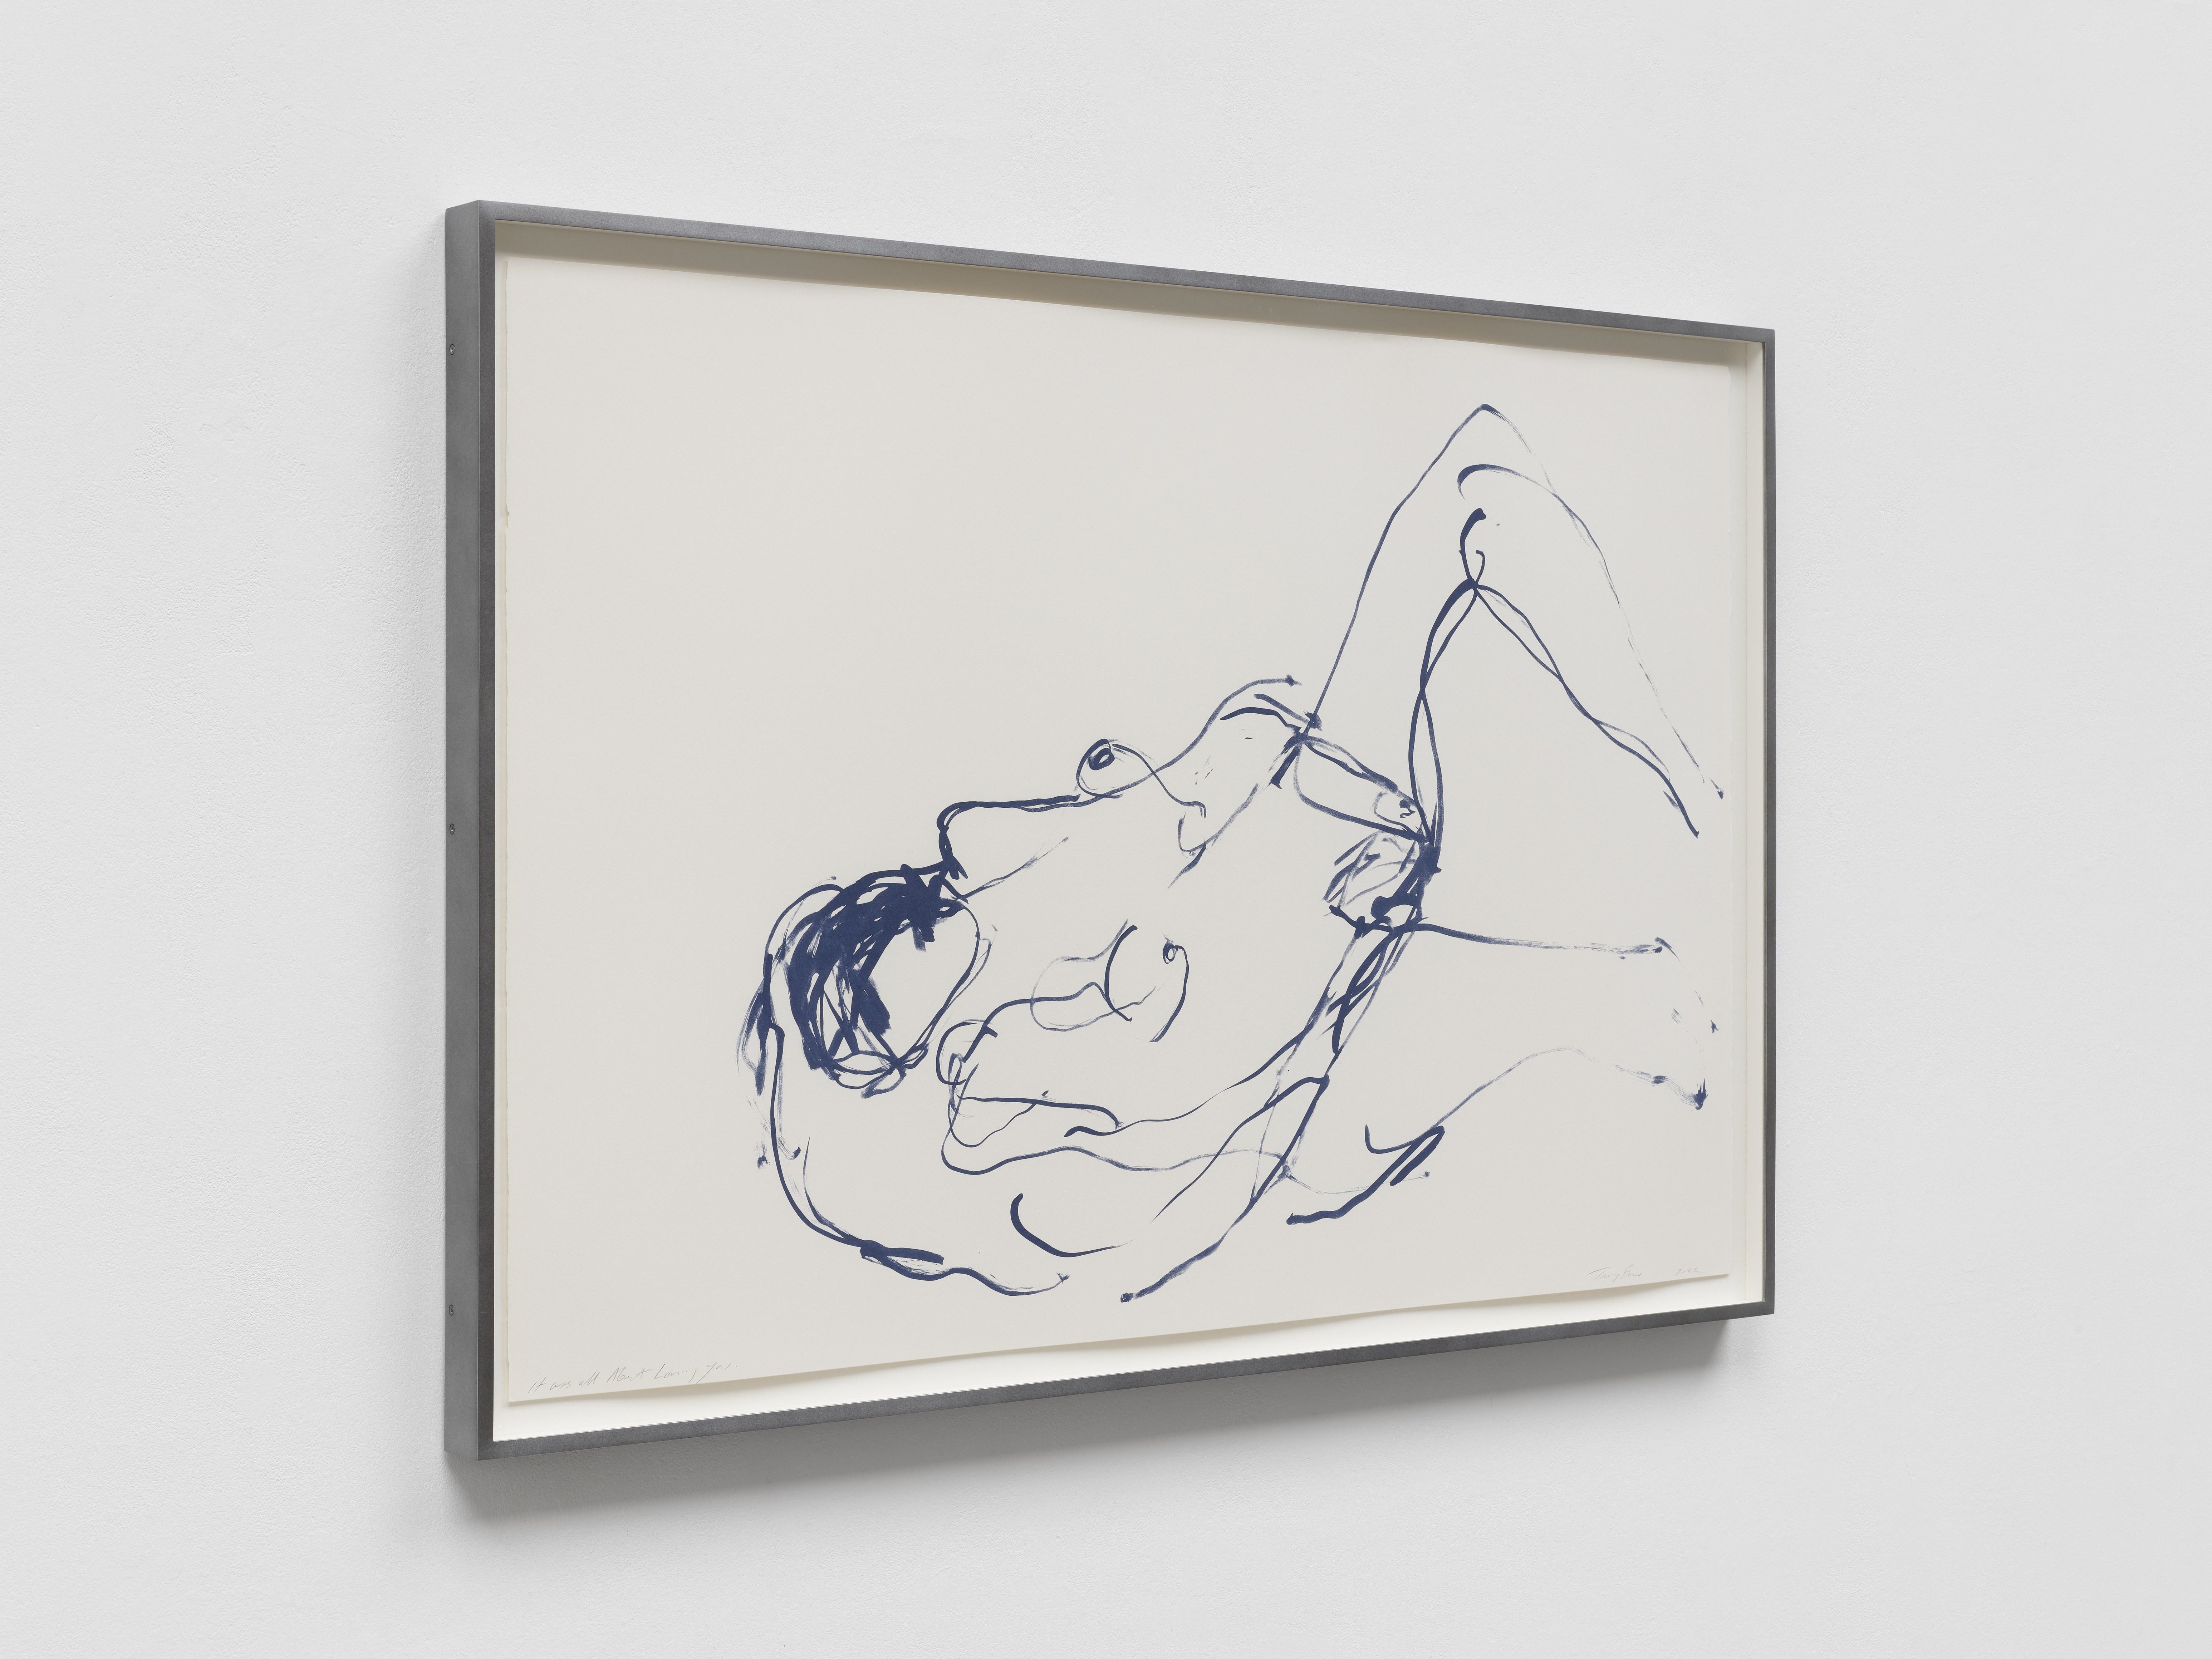 Tracey Emin - It was all About Loving you - 2